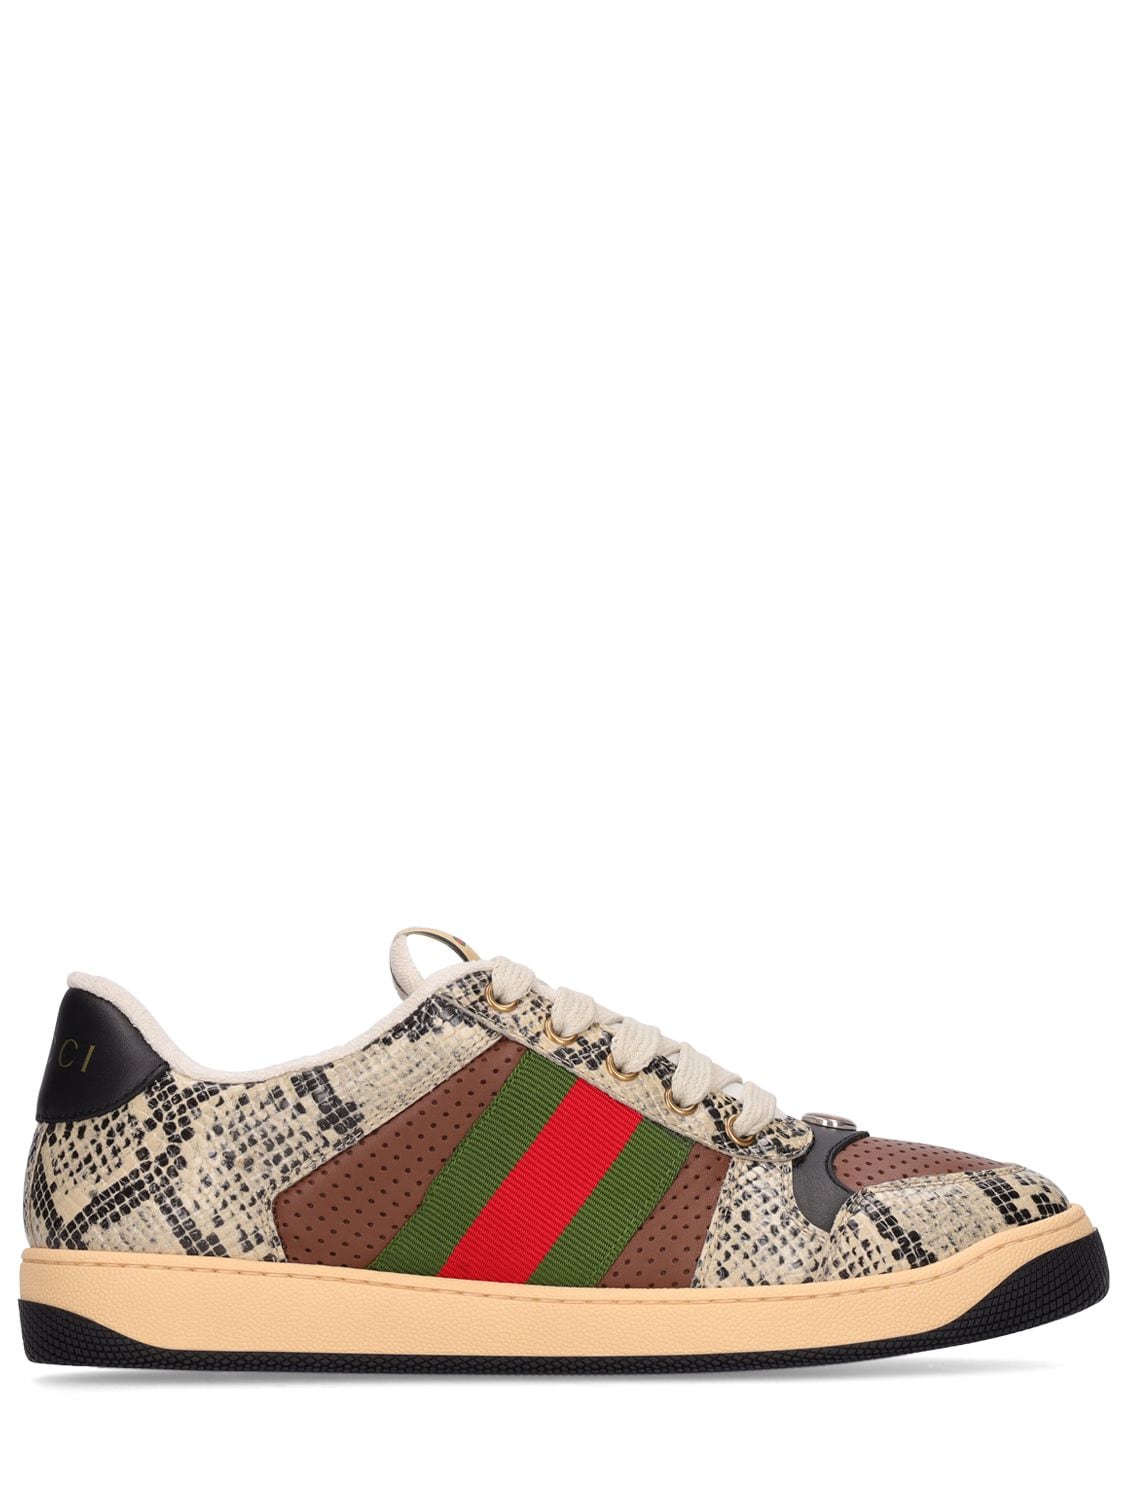 GUCCI Screener Python Print Leather Sneakers | Closet